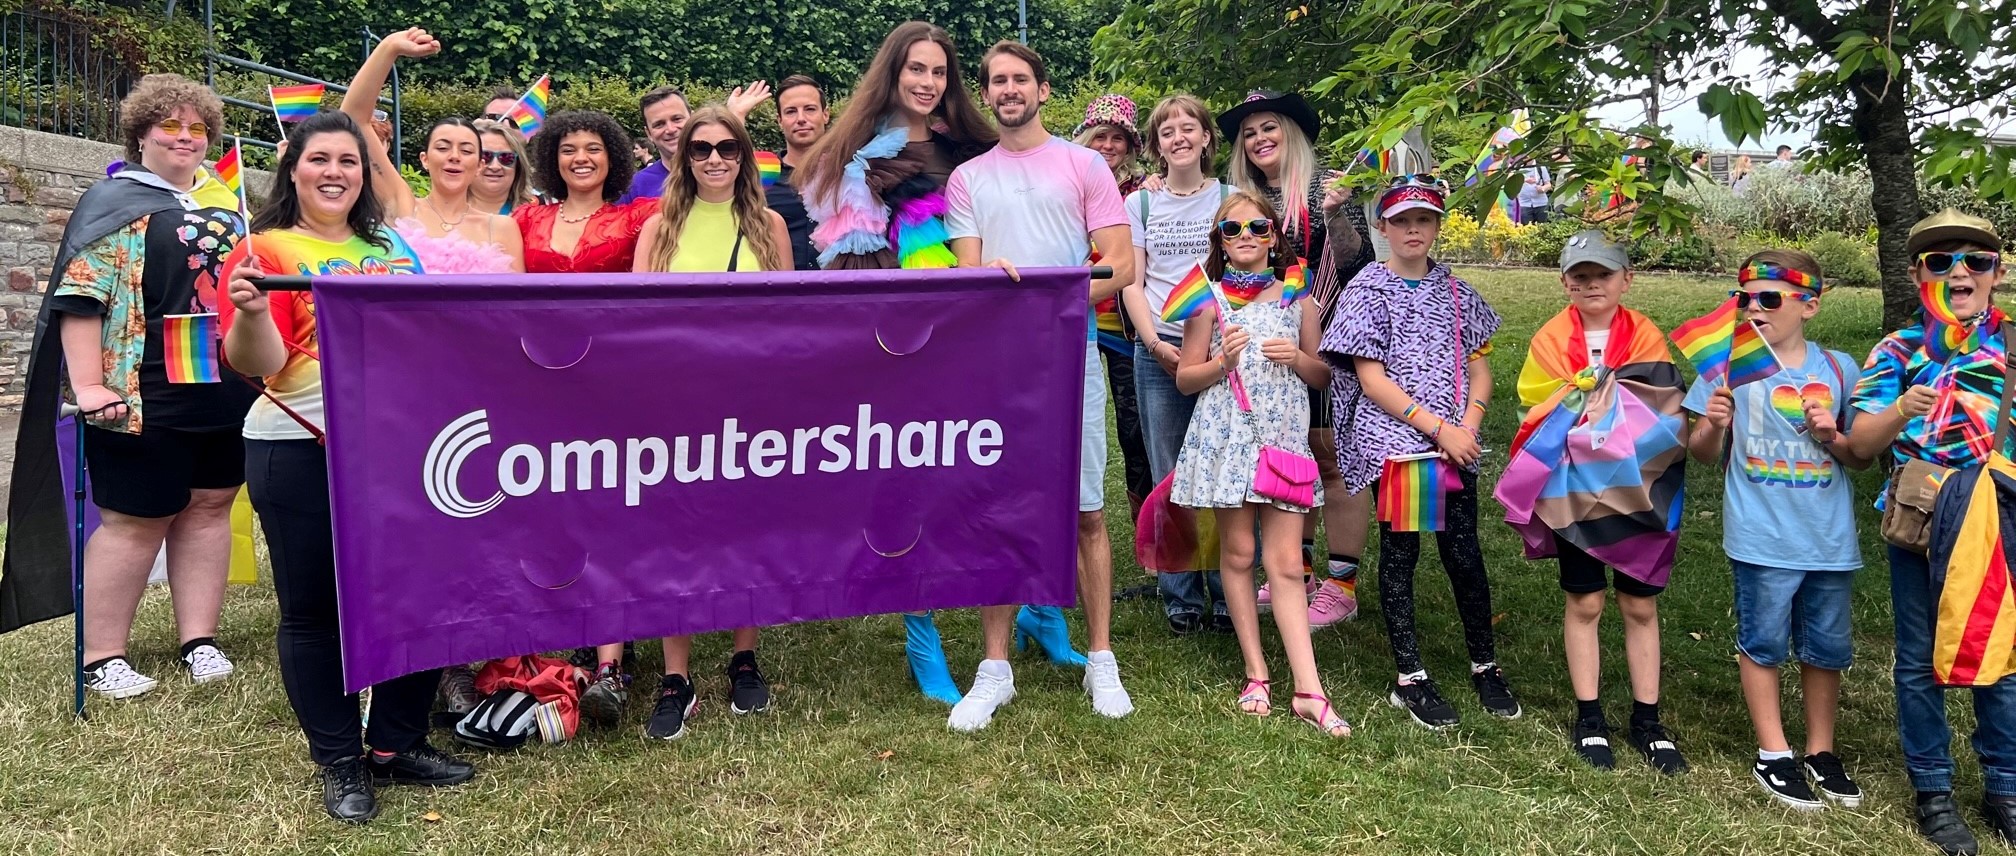 A group celebrating pride with a Computershare banner